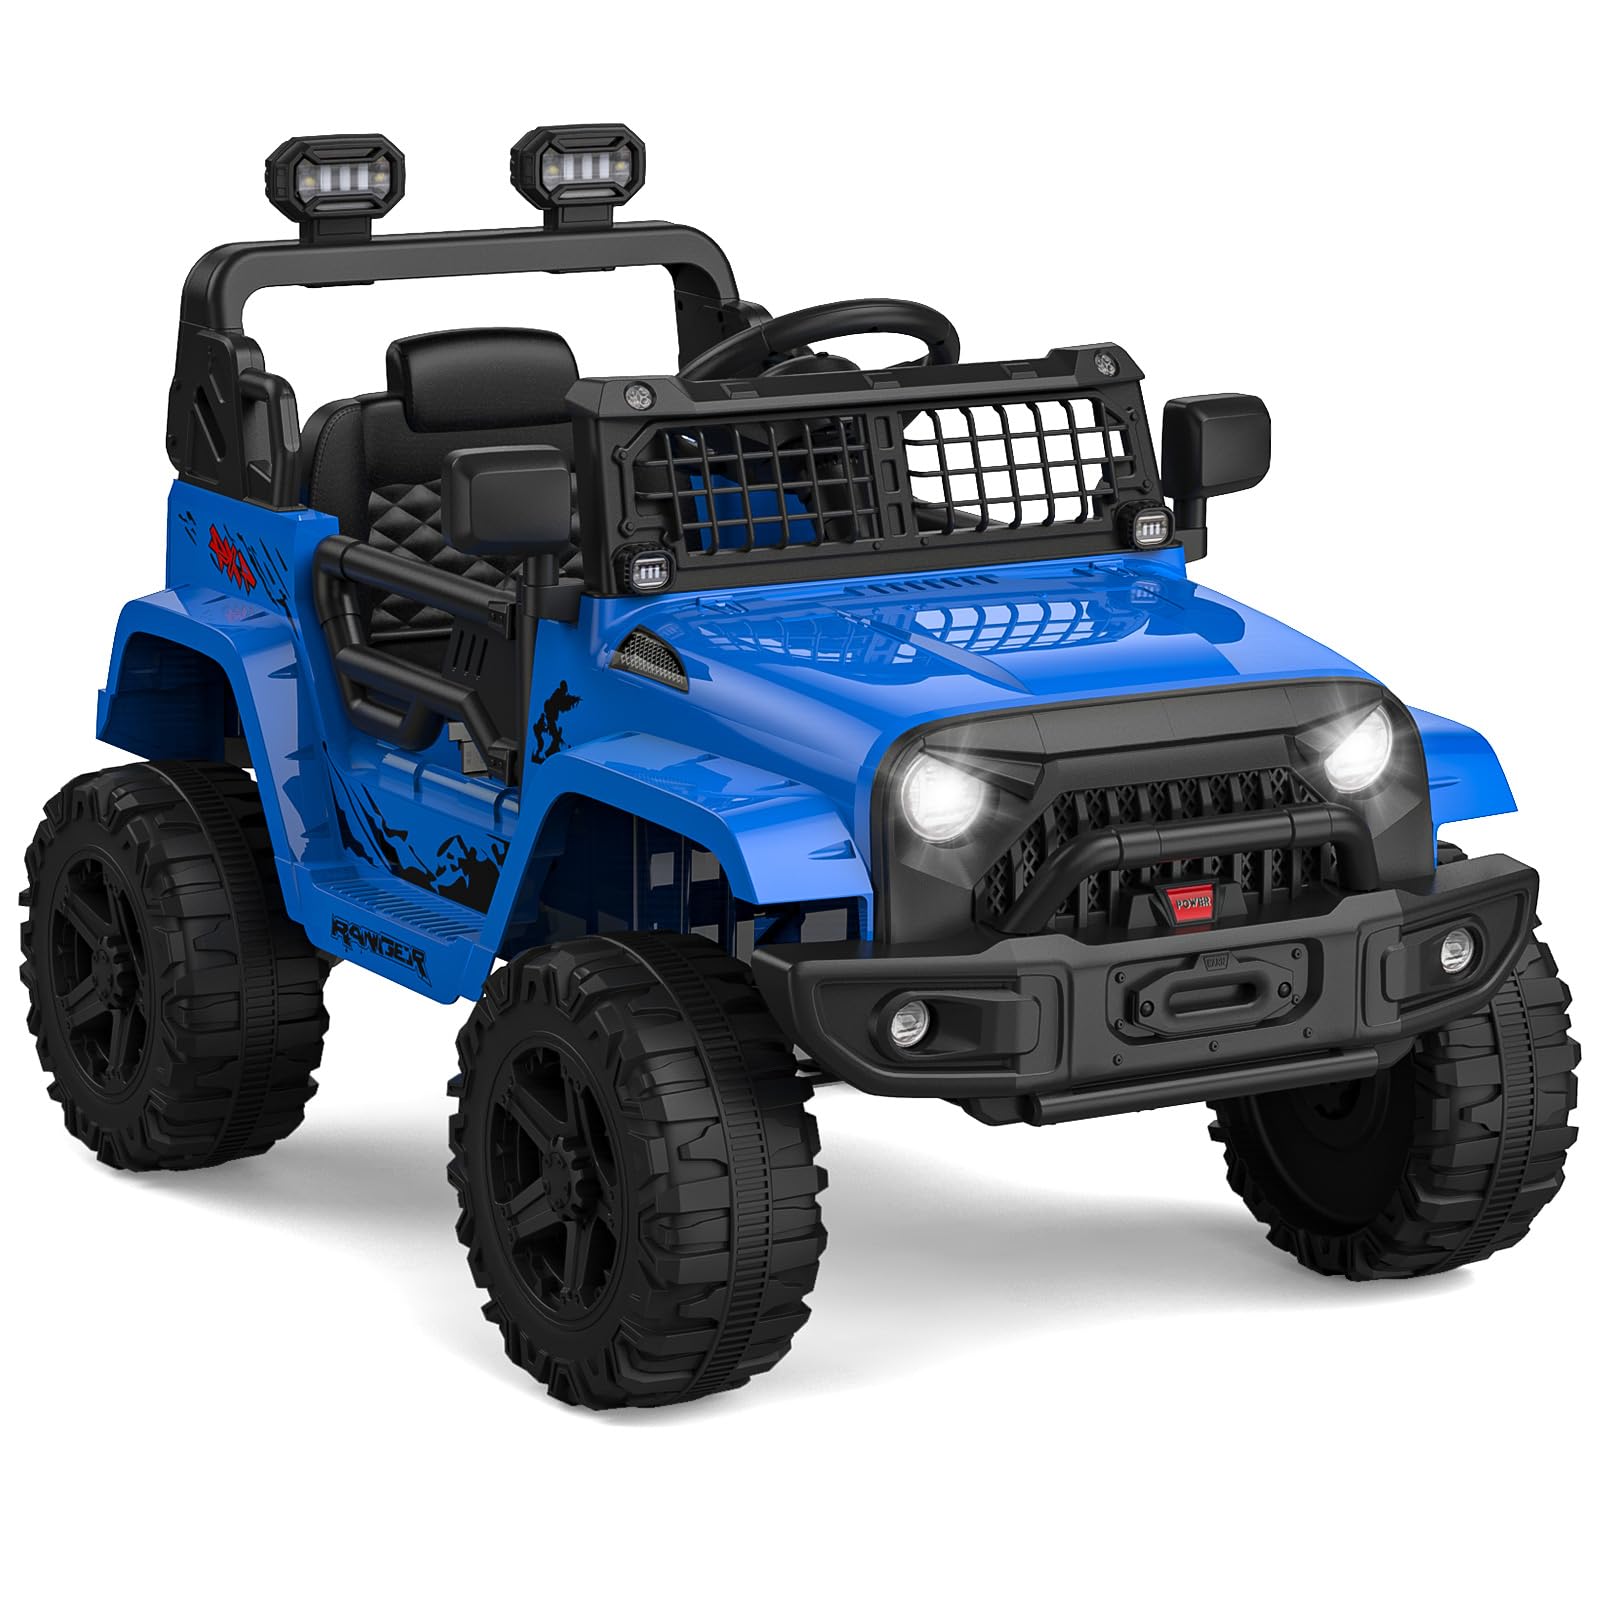 Ride on Truck Car 12V Kids Electric Mini Jeep with Remote Control Spring Suspension, LED Lights, Bluetooth, 2 Speeds (Blue) - image 2 of 8